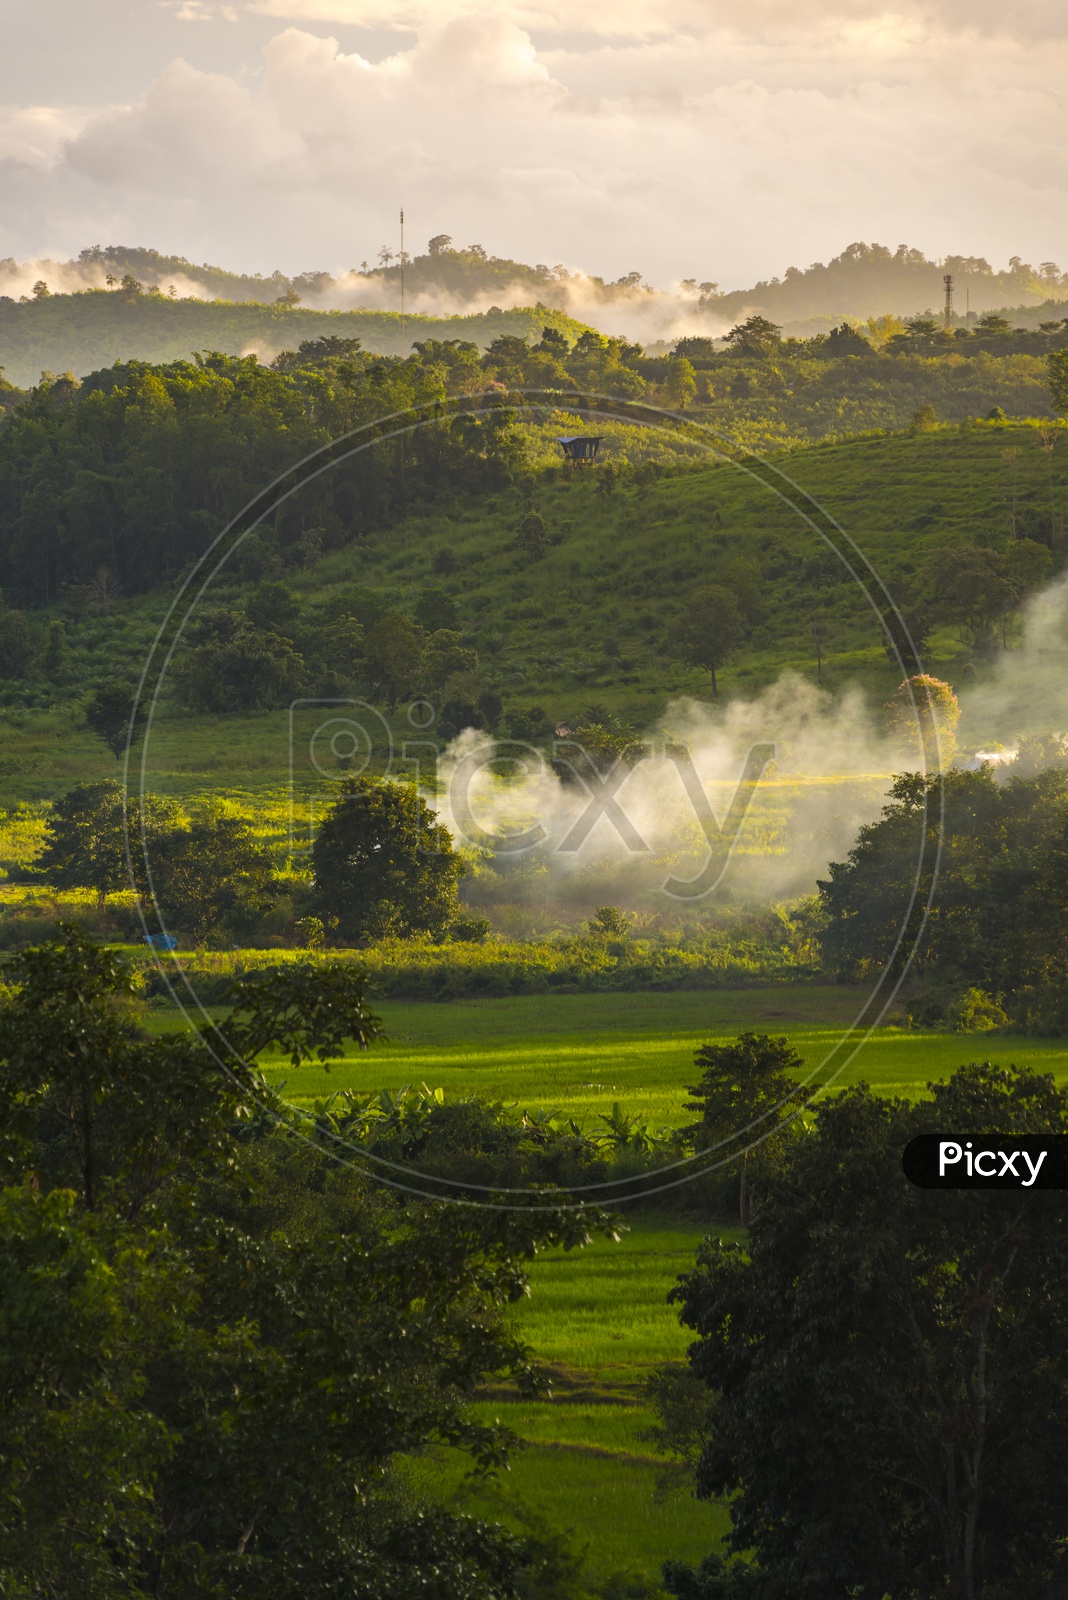 Smoke In Agricultural Fields With Green Fields